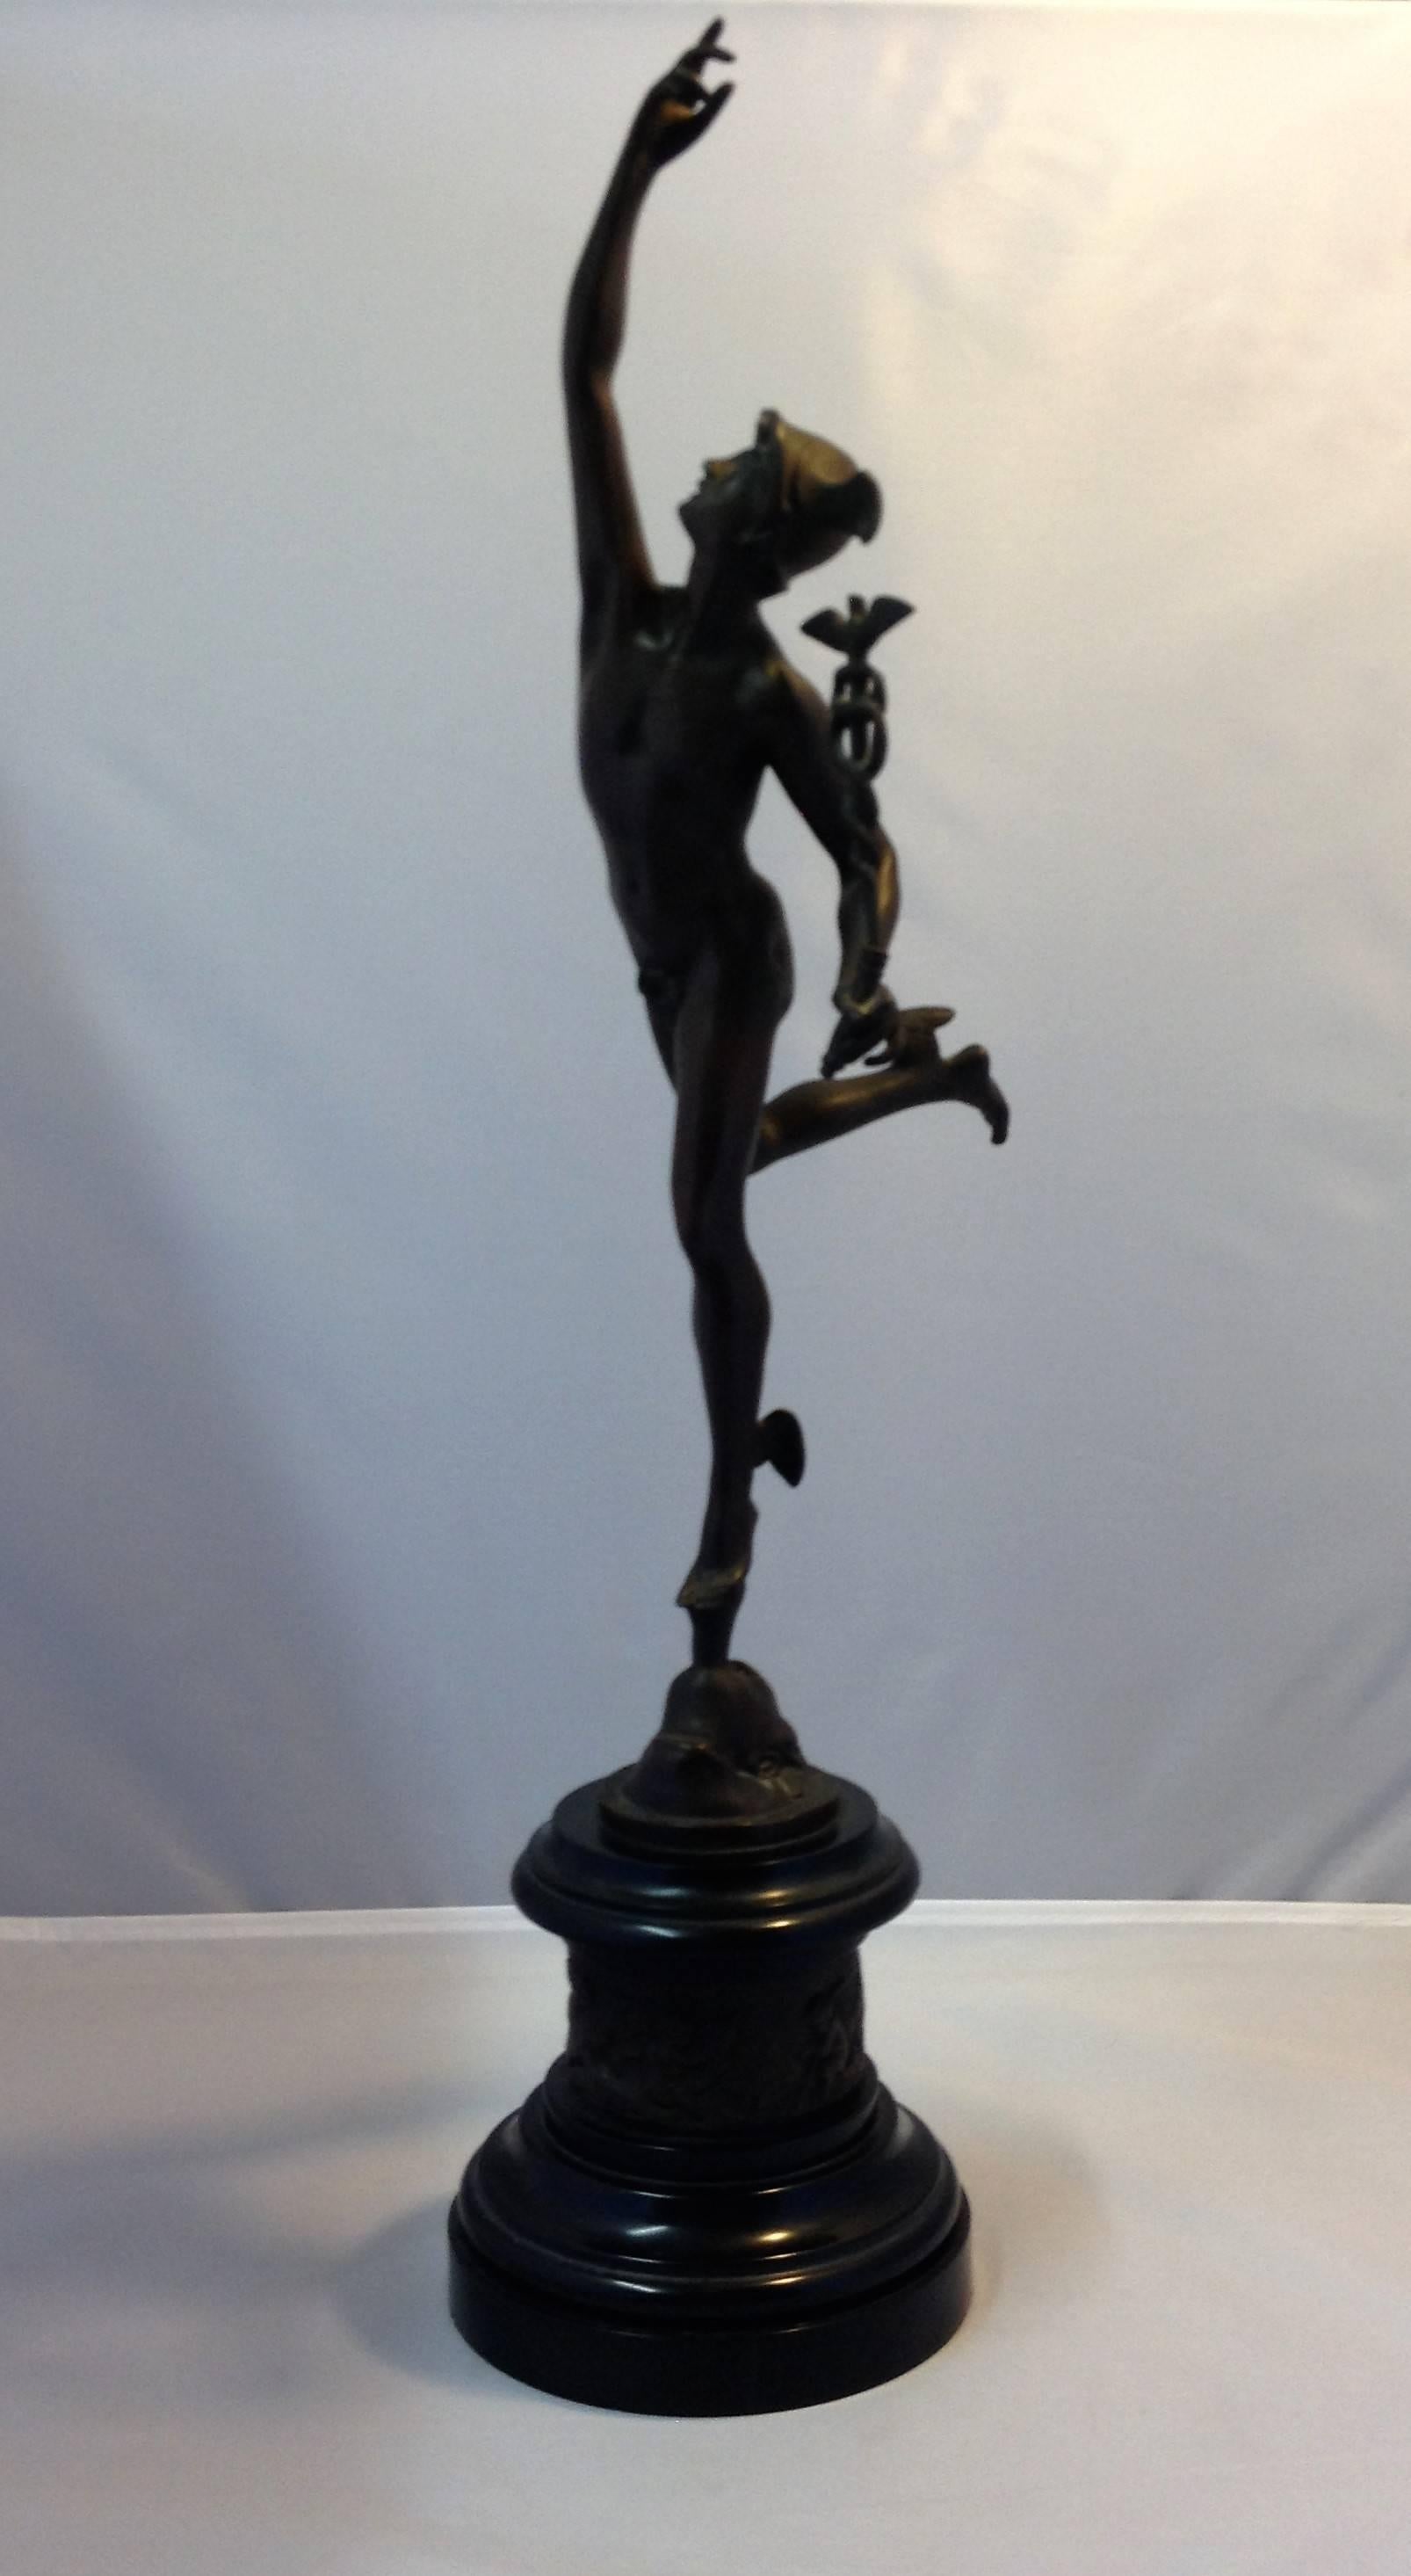 Wonderful 19th century bronze renaissance style figure of mercury (after a model by Giambologna) with a classic brownish patina. Mercury stands atop a bronze and black marble base with frieze of cherubs and figures holding a caduceus. Bronze is